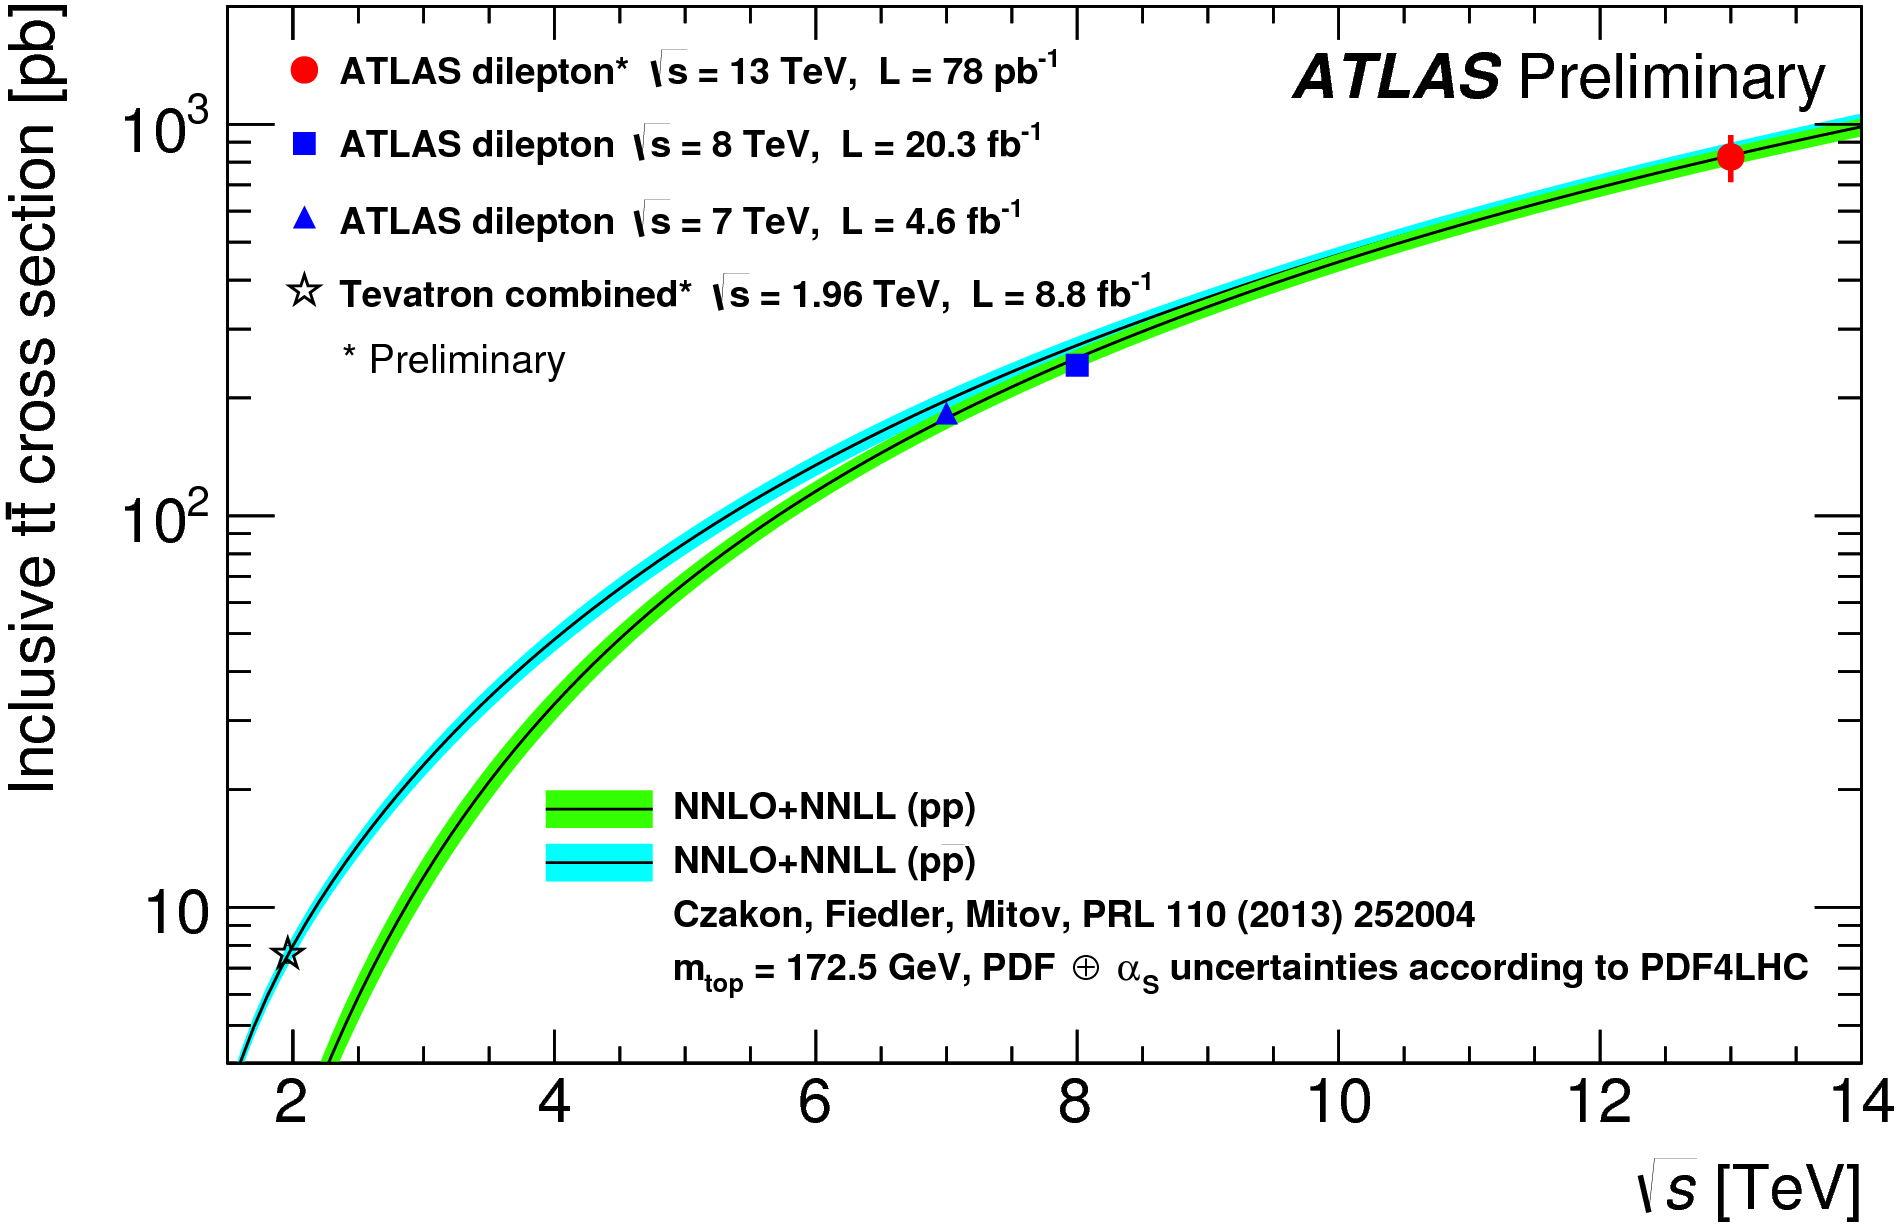 This new result at 13 TeV (red circle) is compared to previous results from ATLAS